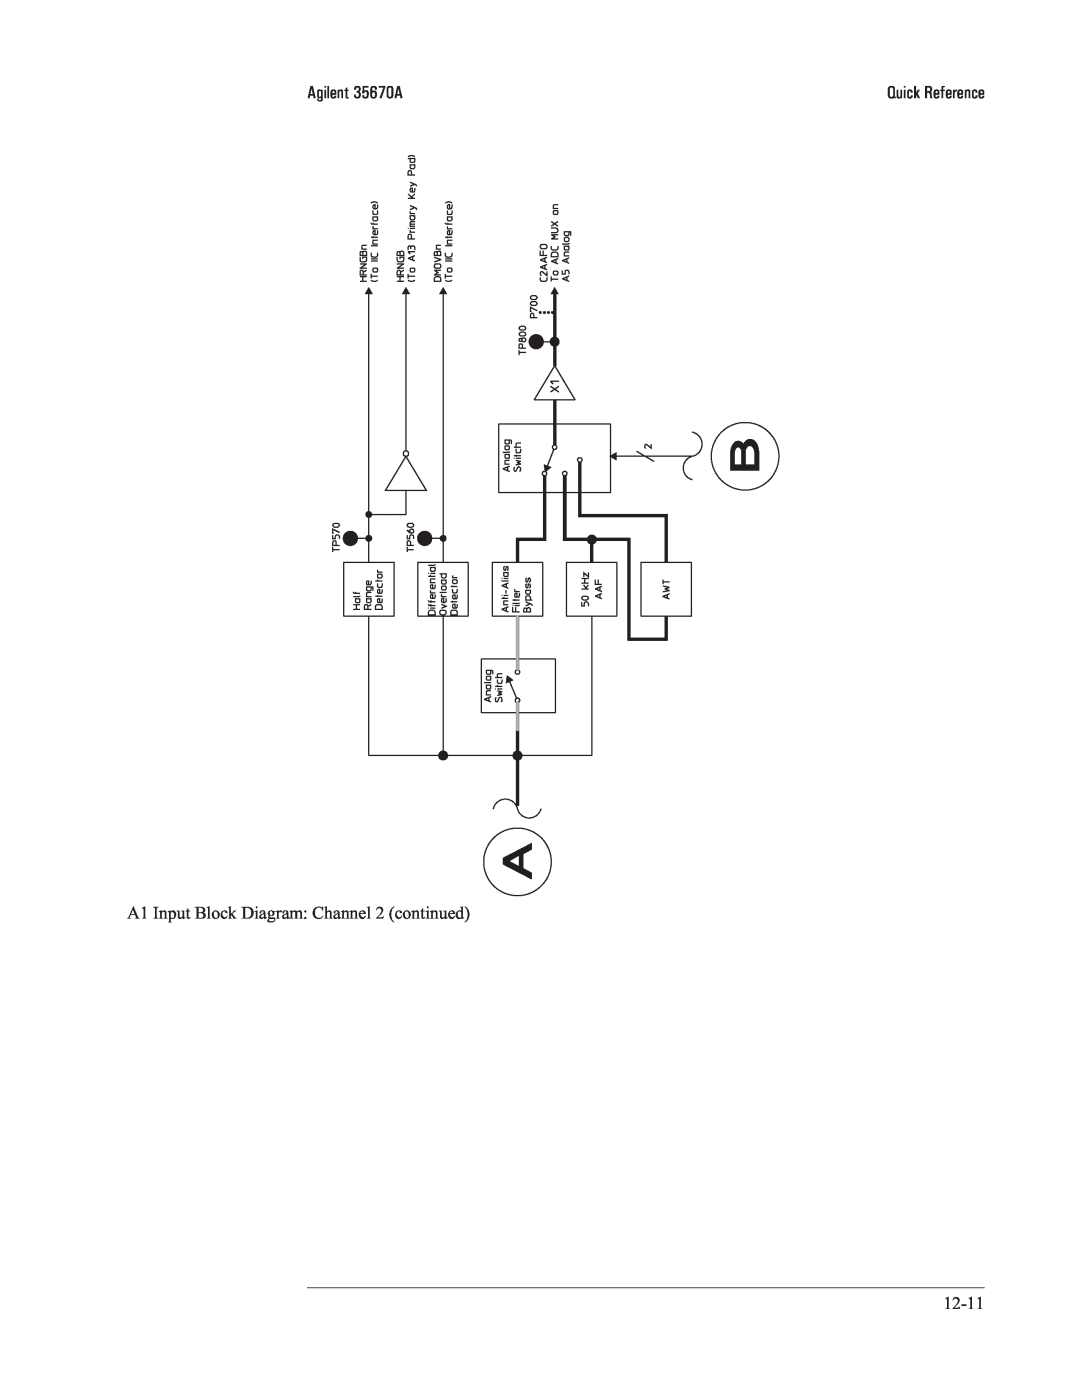 Agilent Technologies 35670-90066 manual Agilent 35670A, A1 Input Block Diagram: Channel 2 continued, Quick Reference 